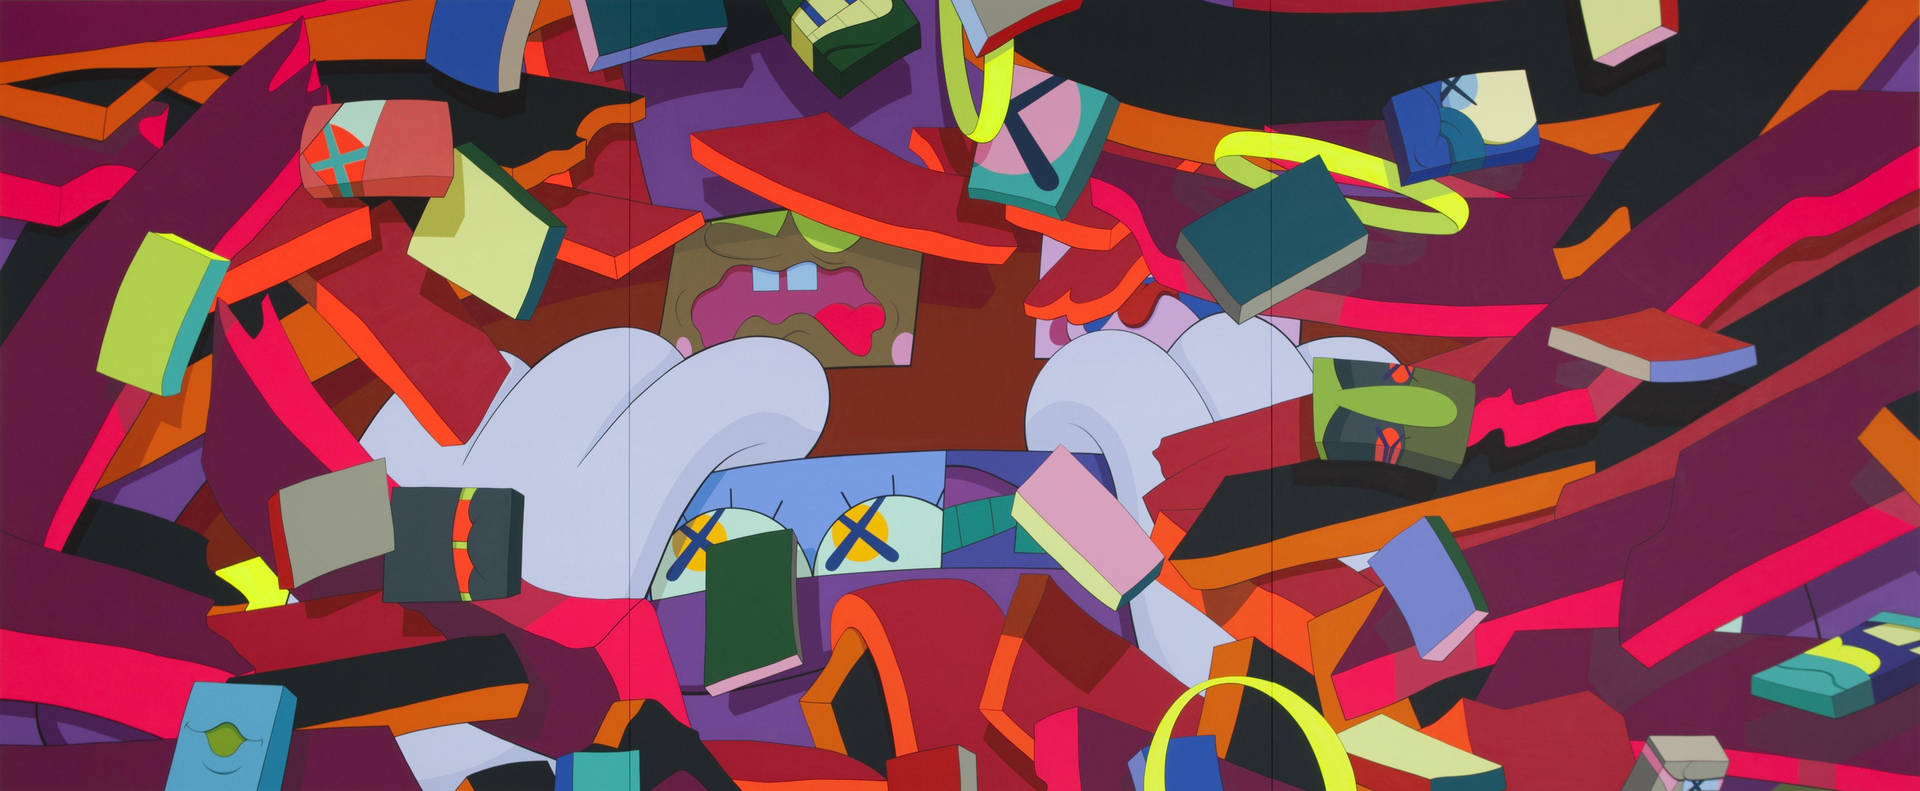 Expertly Crafted Artwork By Kaws, Encapsulating Contemporary Vibrancy.